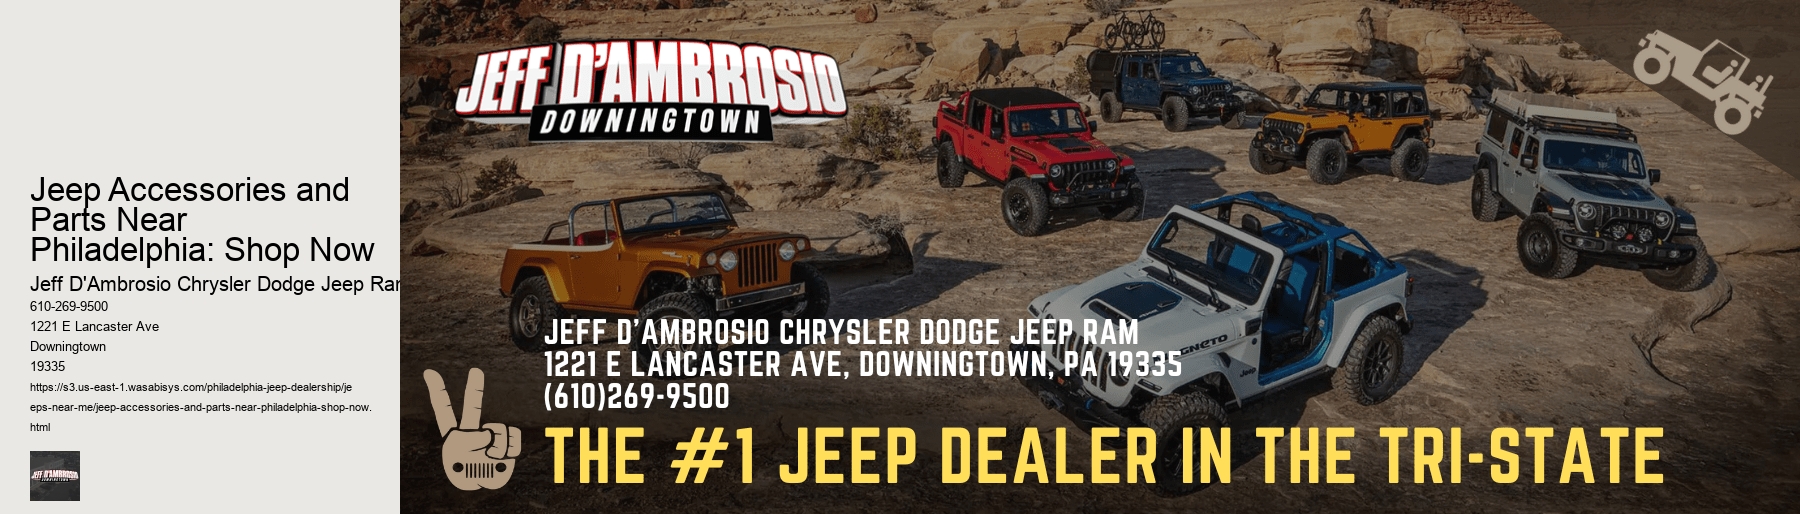 Jeep Accessories and Parts Near Philadelphia: Shop Now